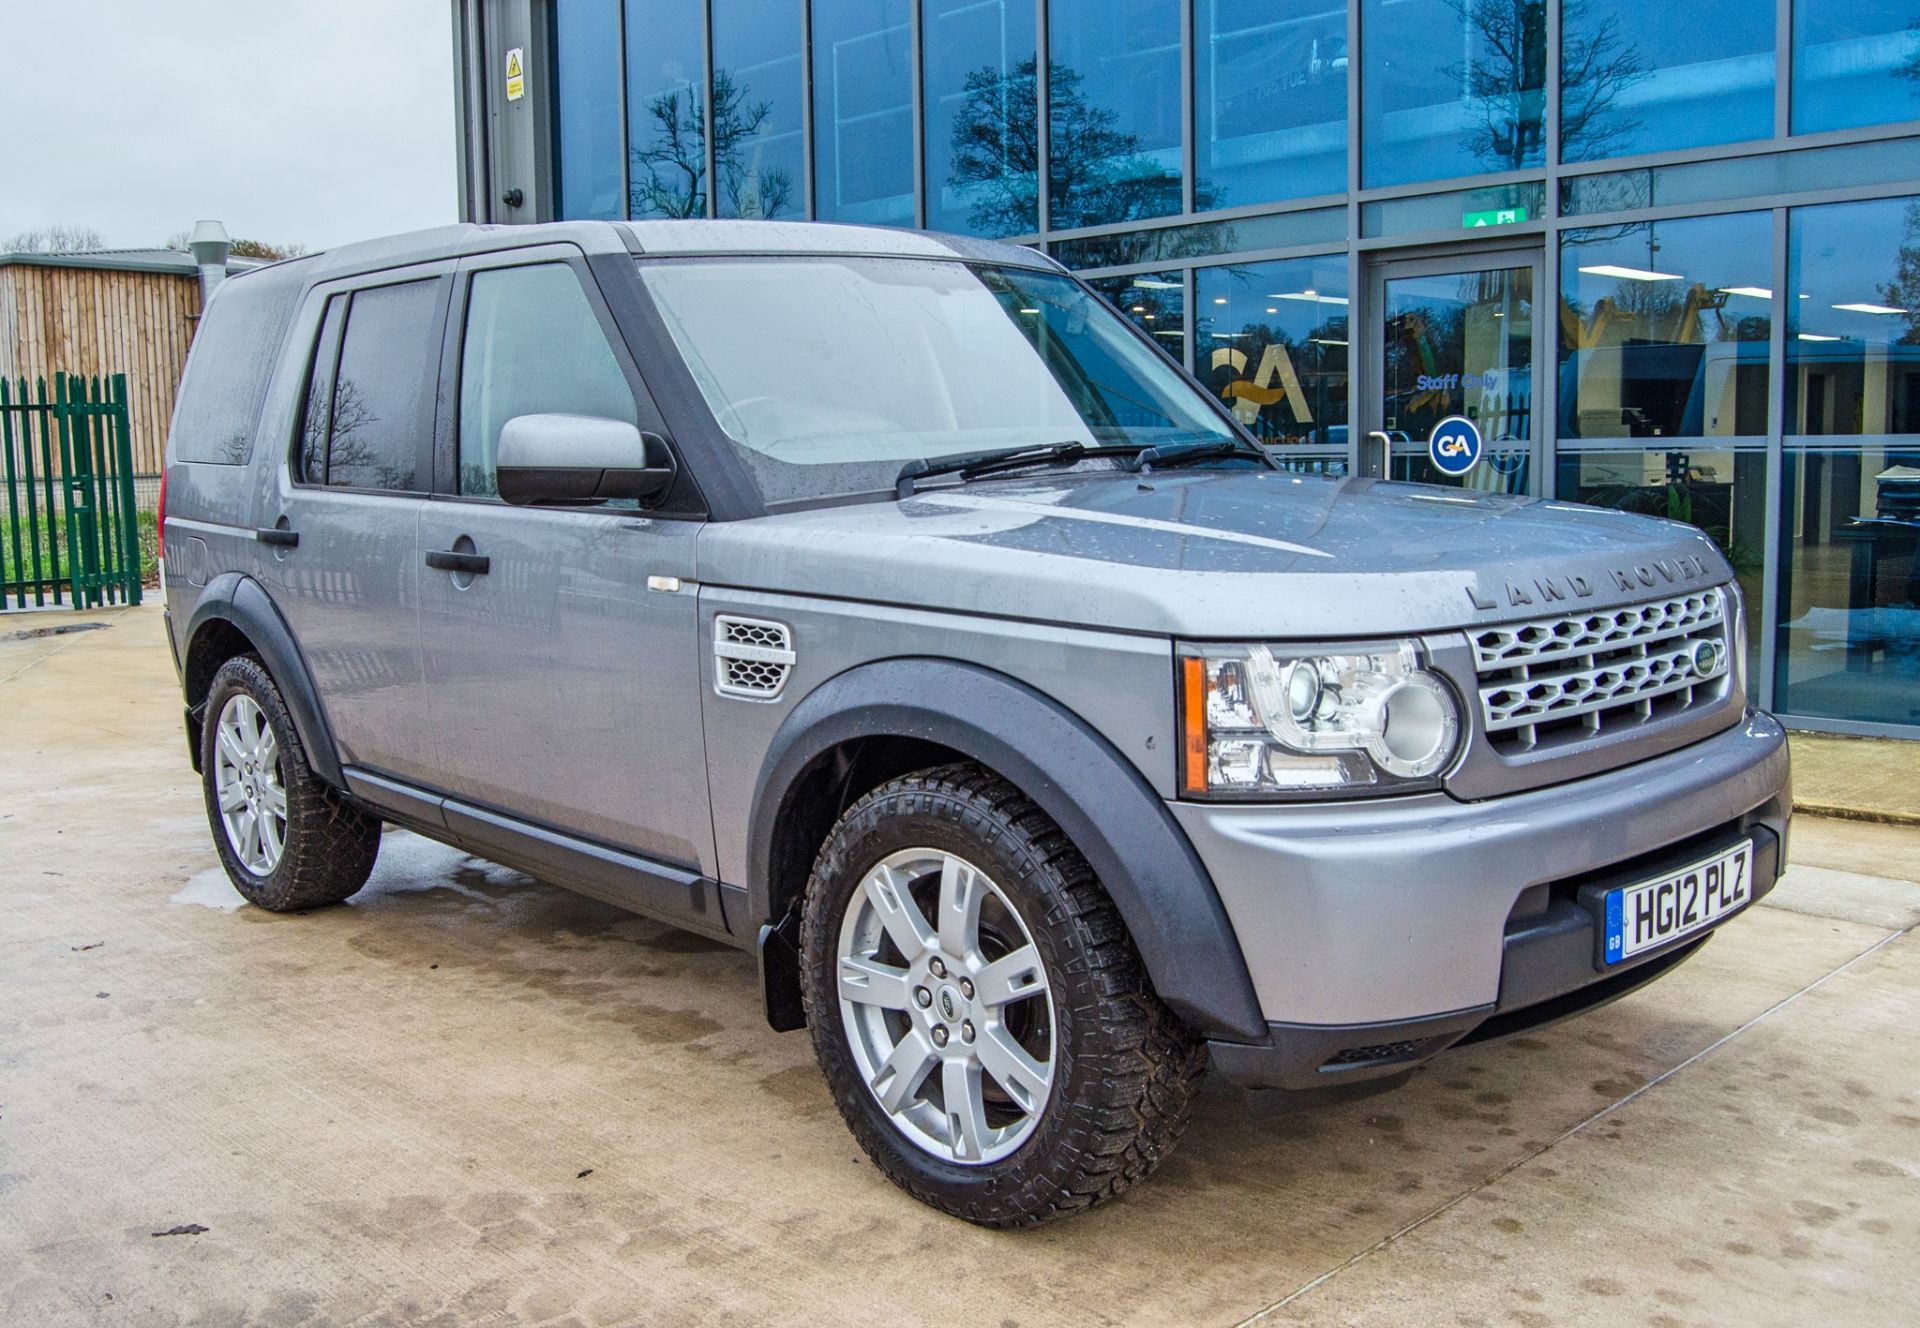 Land Rover Discovery 4 Commercial 2993cc TDV6 Auto light goods vehicle Registration Number: HG12 PLZ - Image 2 of 42